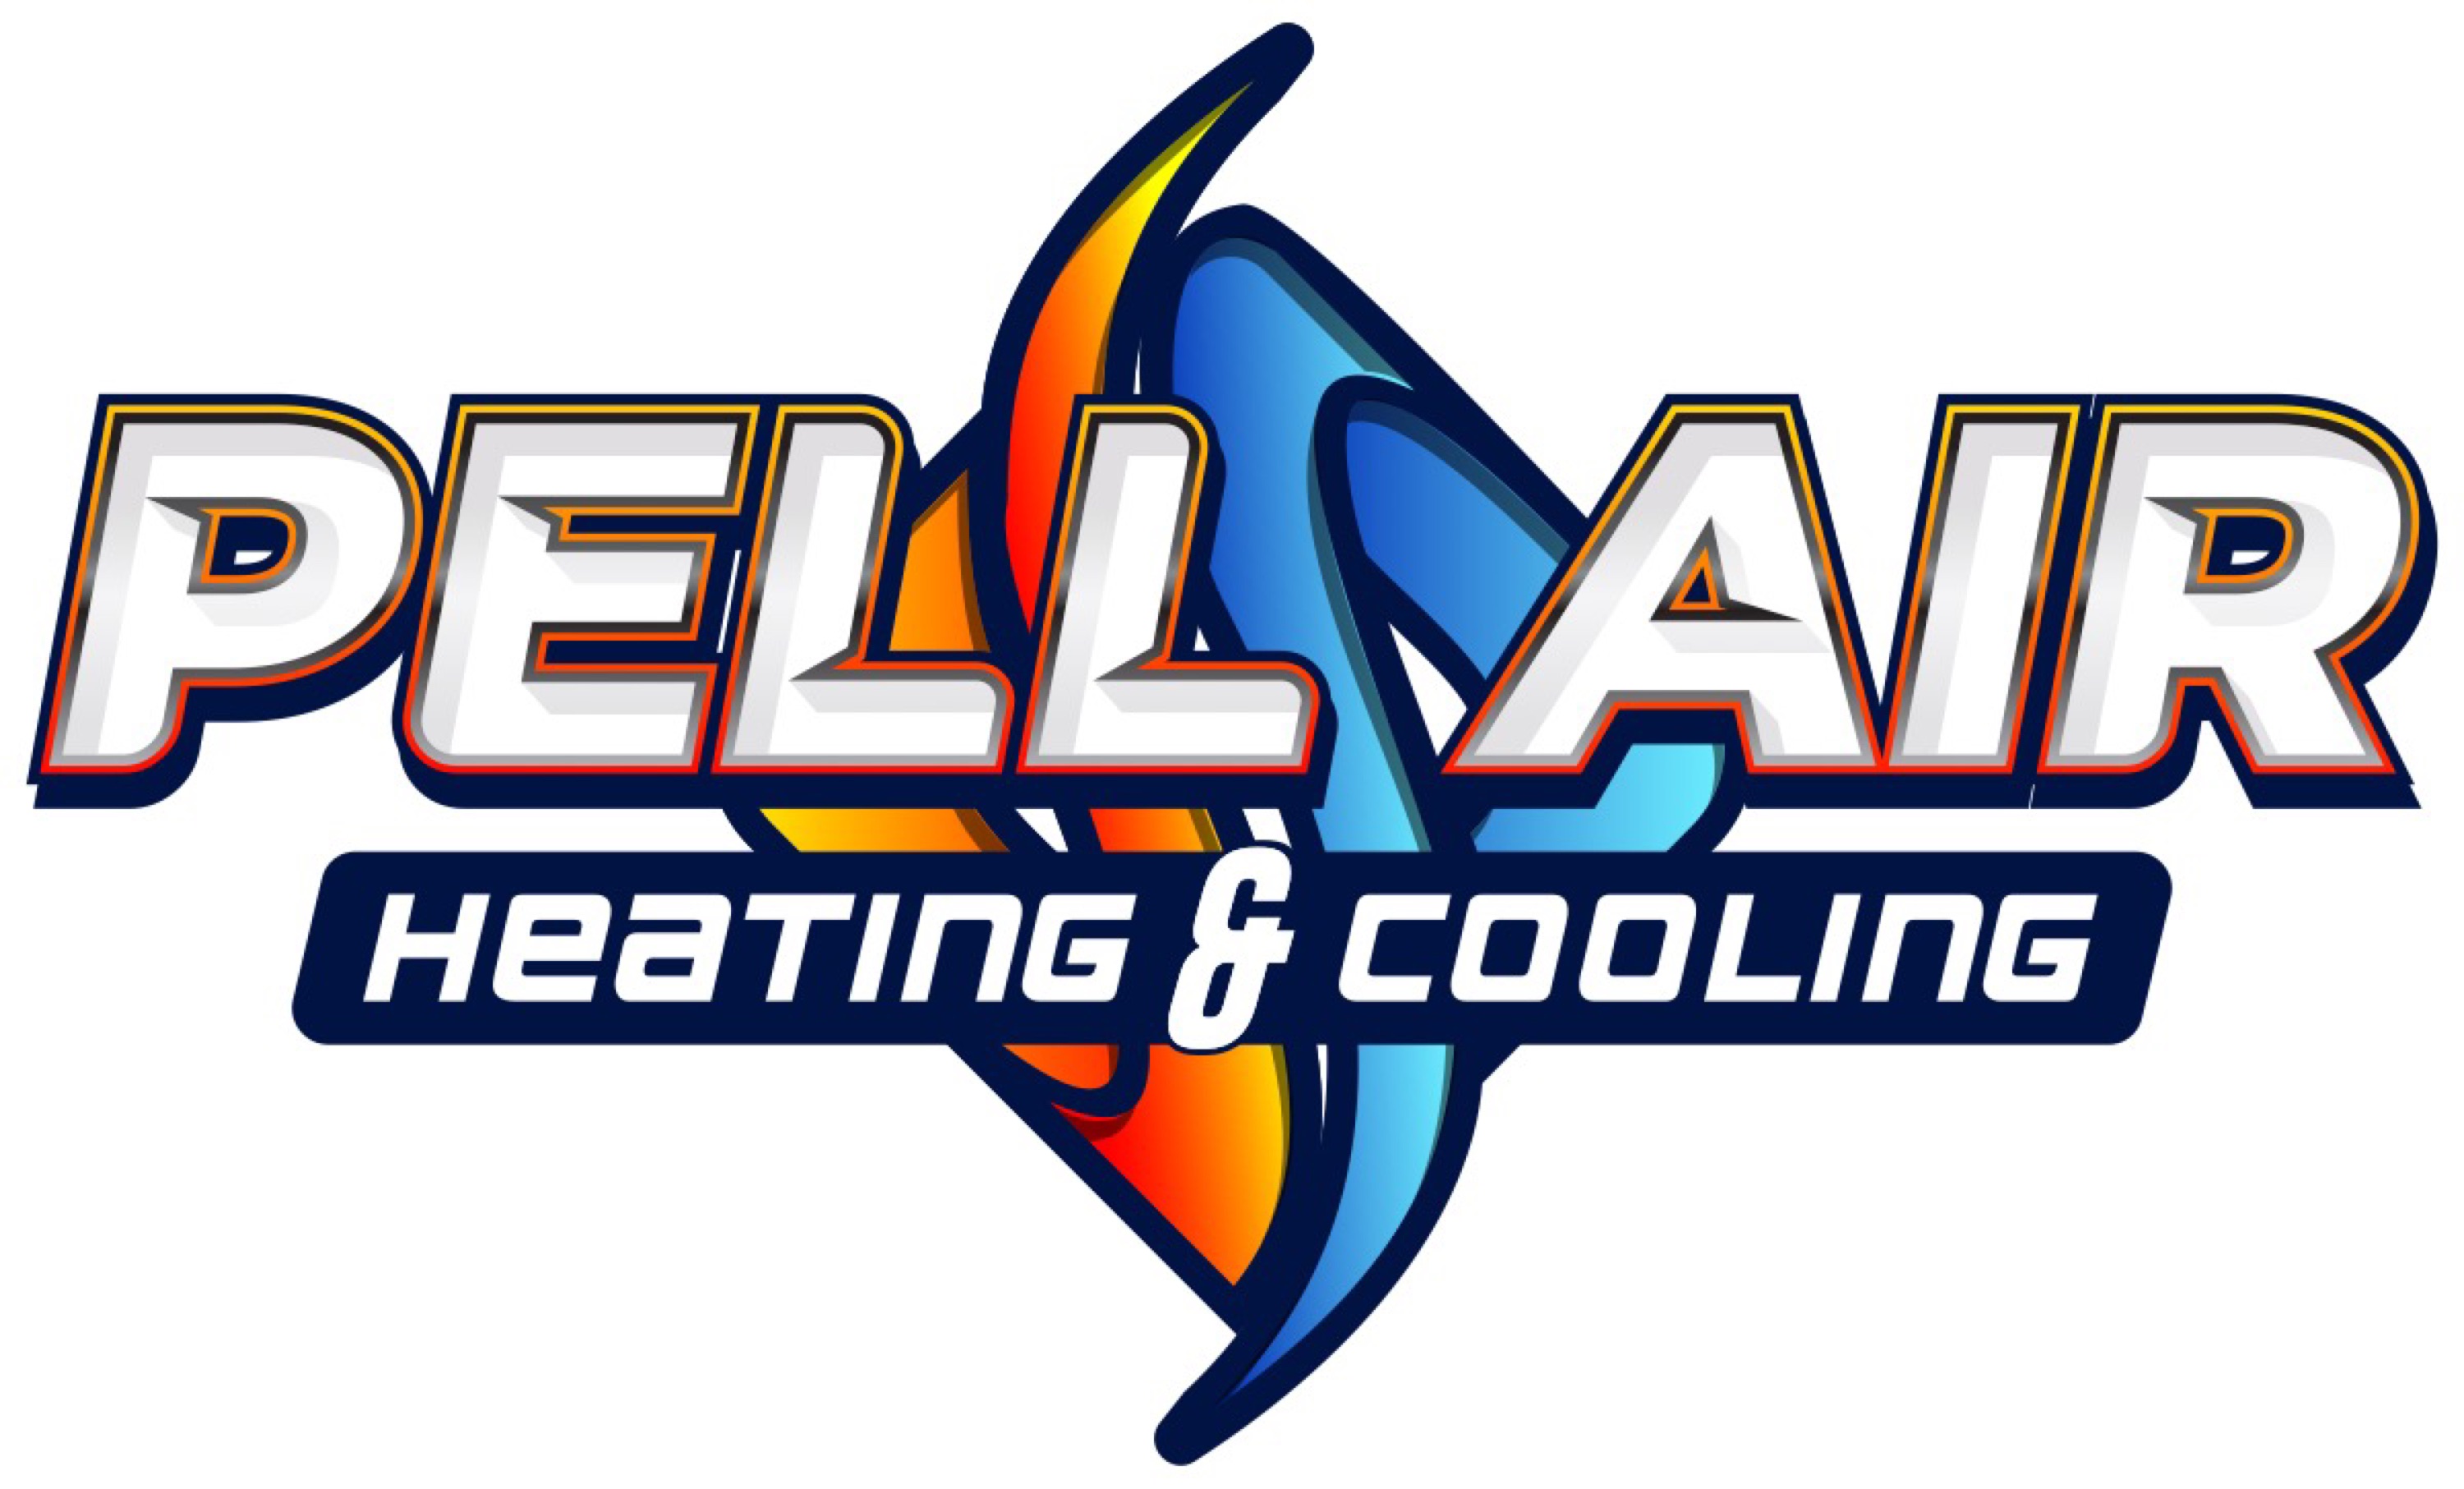 Pell Air Heating & Cooling Logo